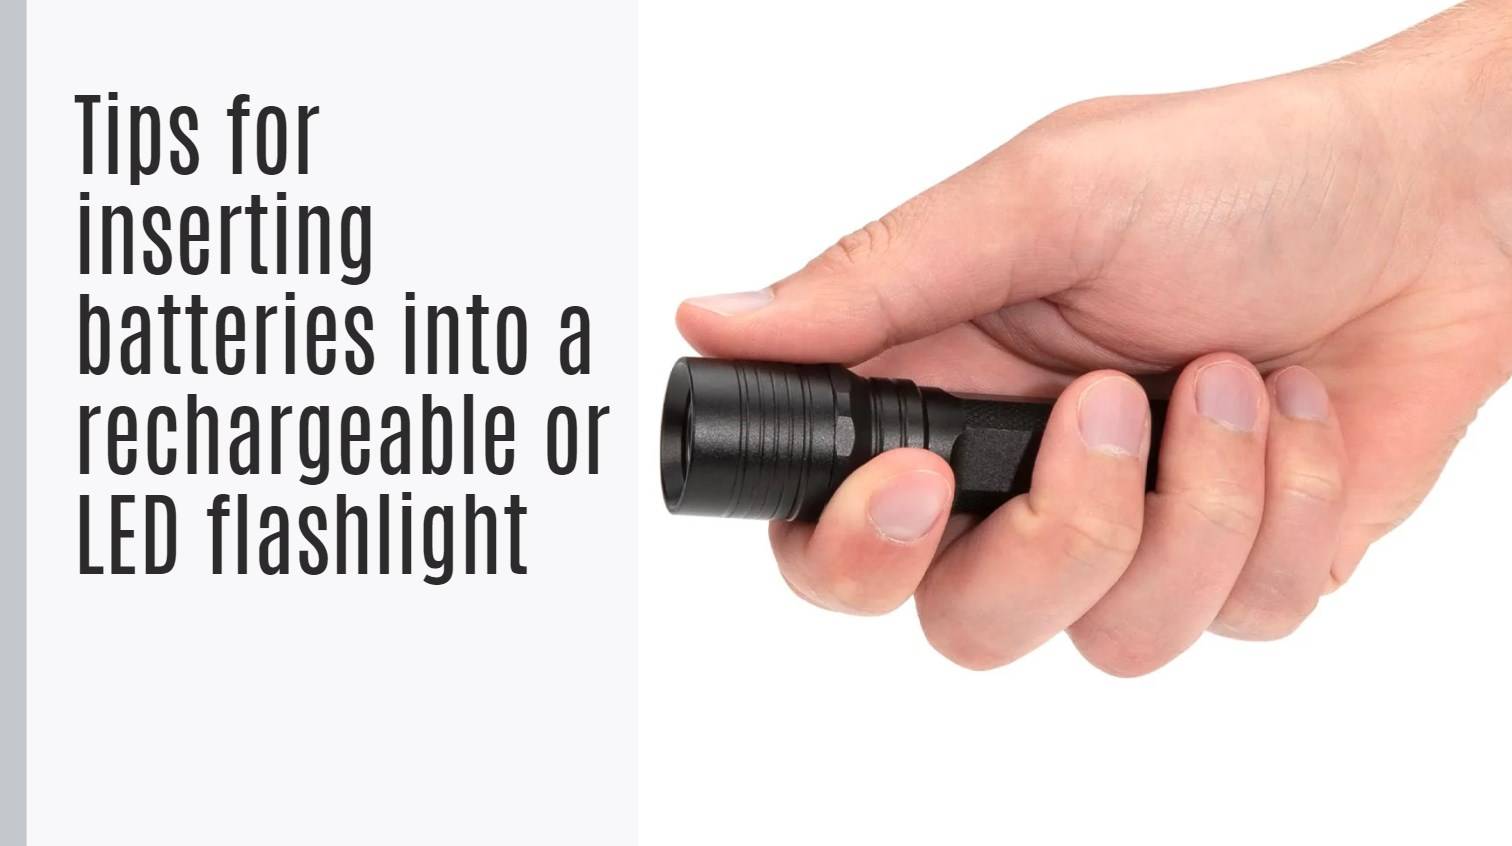 Tips for inserting batteries into a rechargeable or LED flashlight. What Is The Correct Way To Put Batteries In A Flashlight?